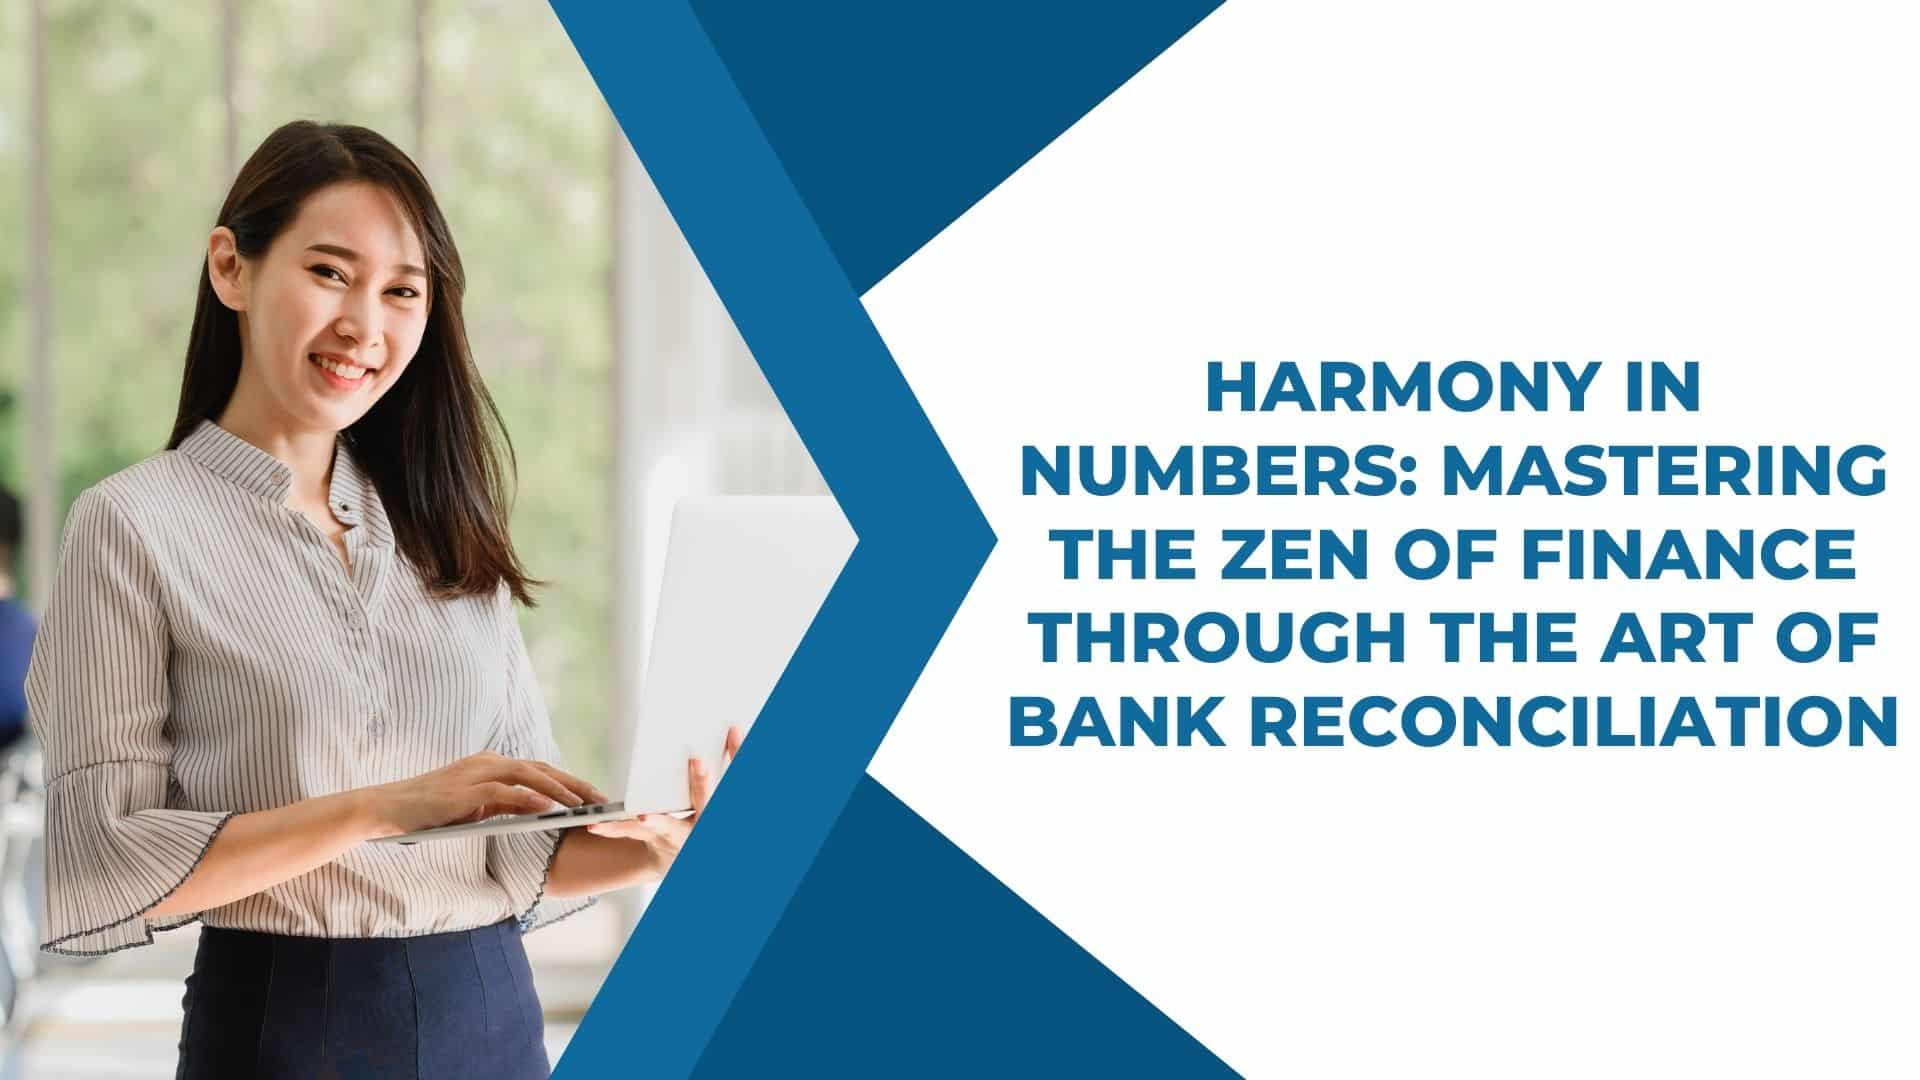 Harmony in Numbers: Mastering The Zen of Finance through the Art of Bank Reconciliation